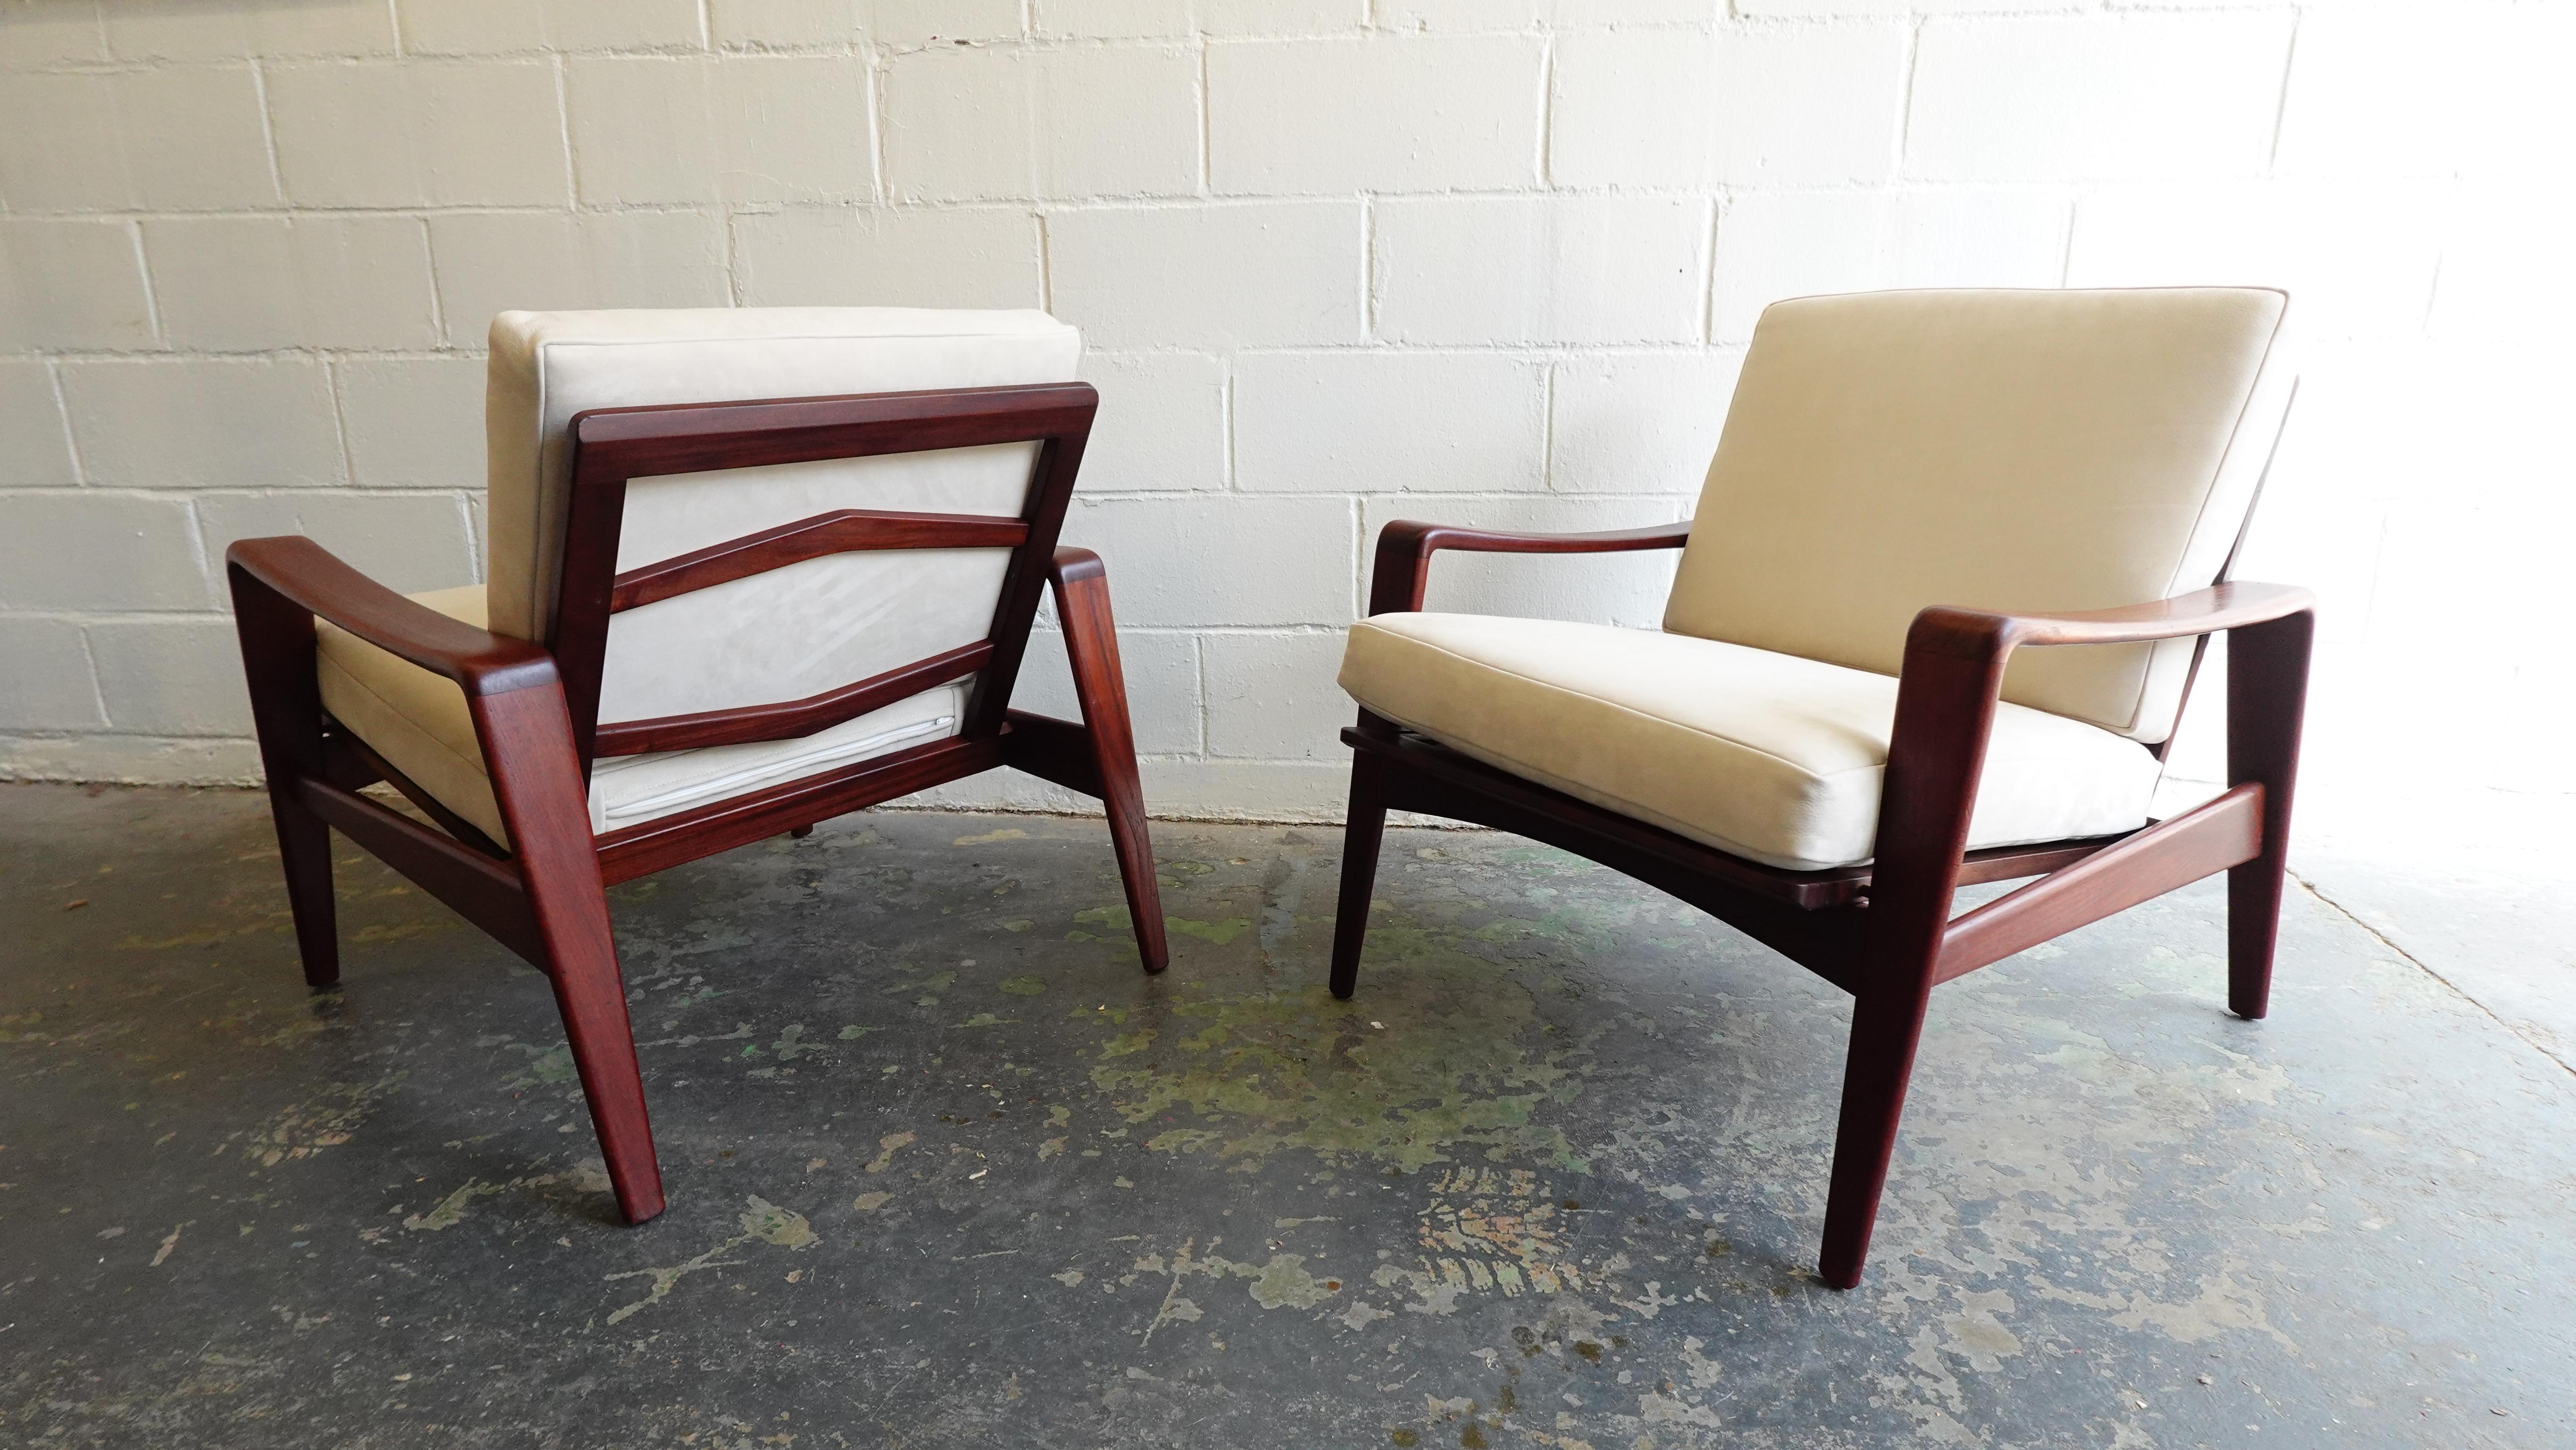 Pair of Arne Wahl Iverson Lounge Chairs for Komfort in Teak & Leather, 1960 For Sale 4